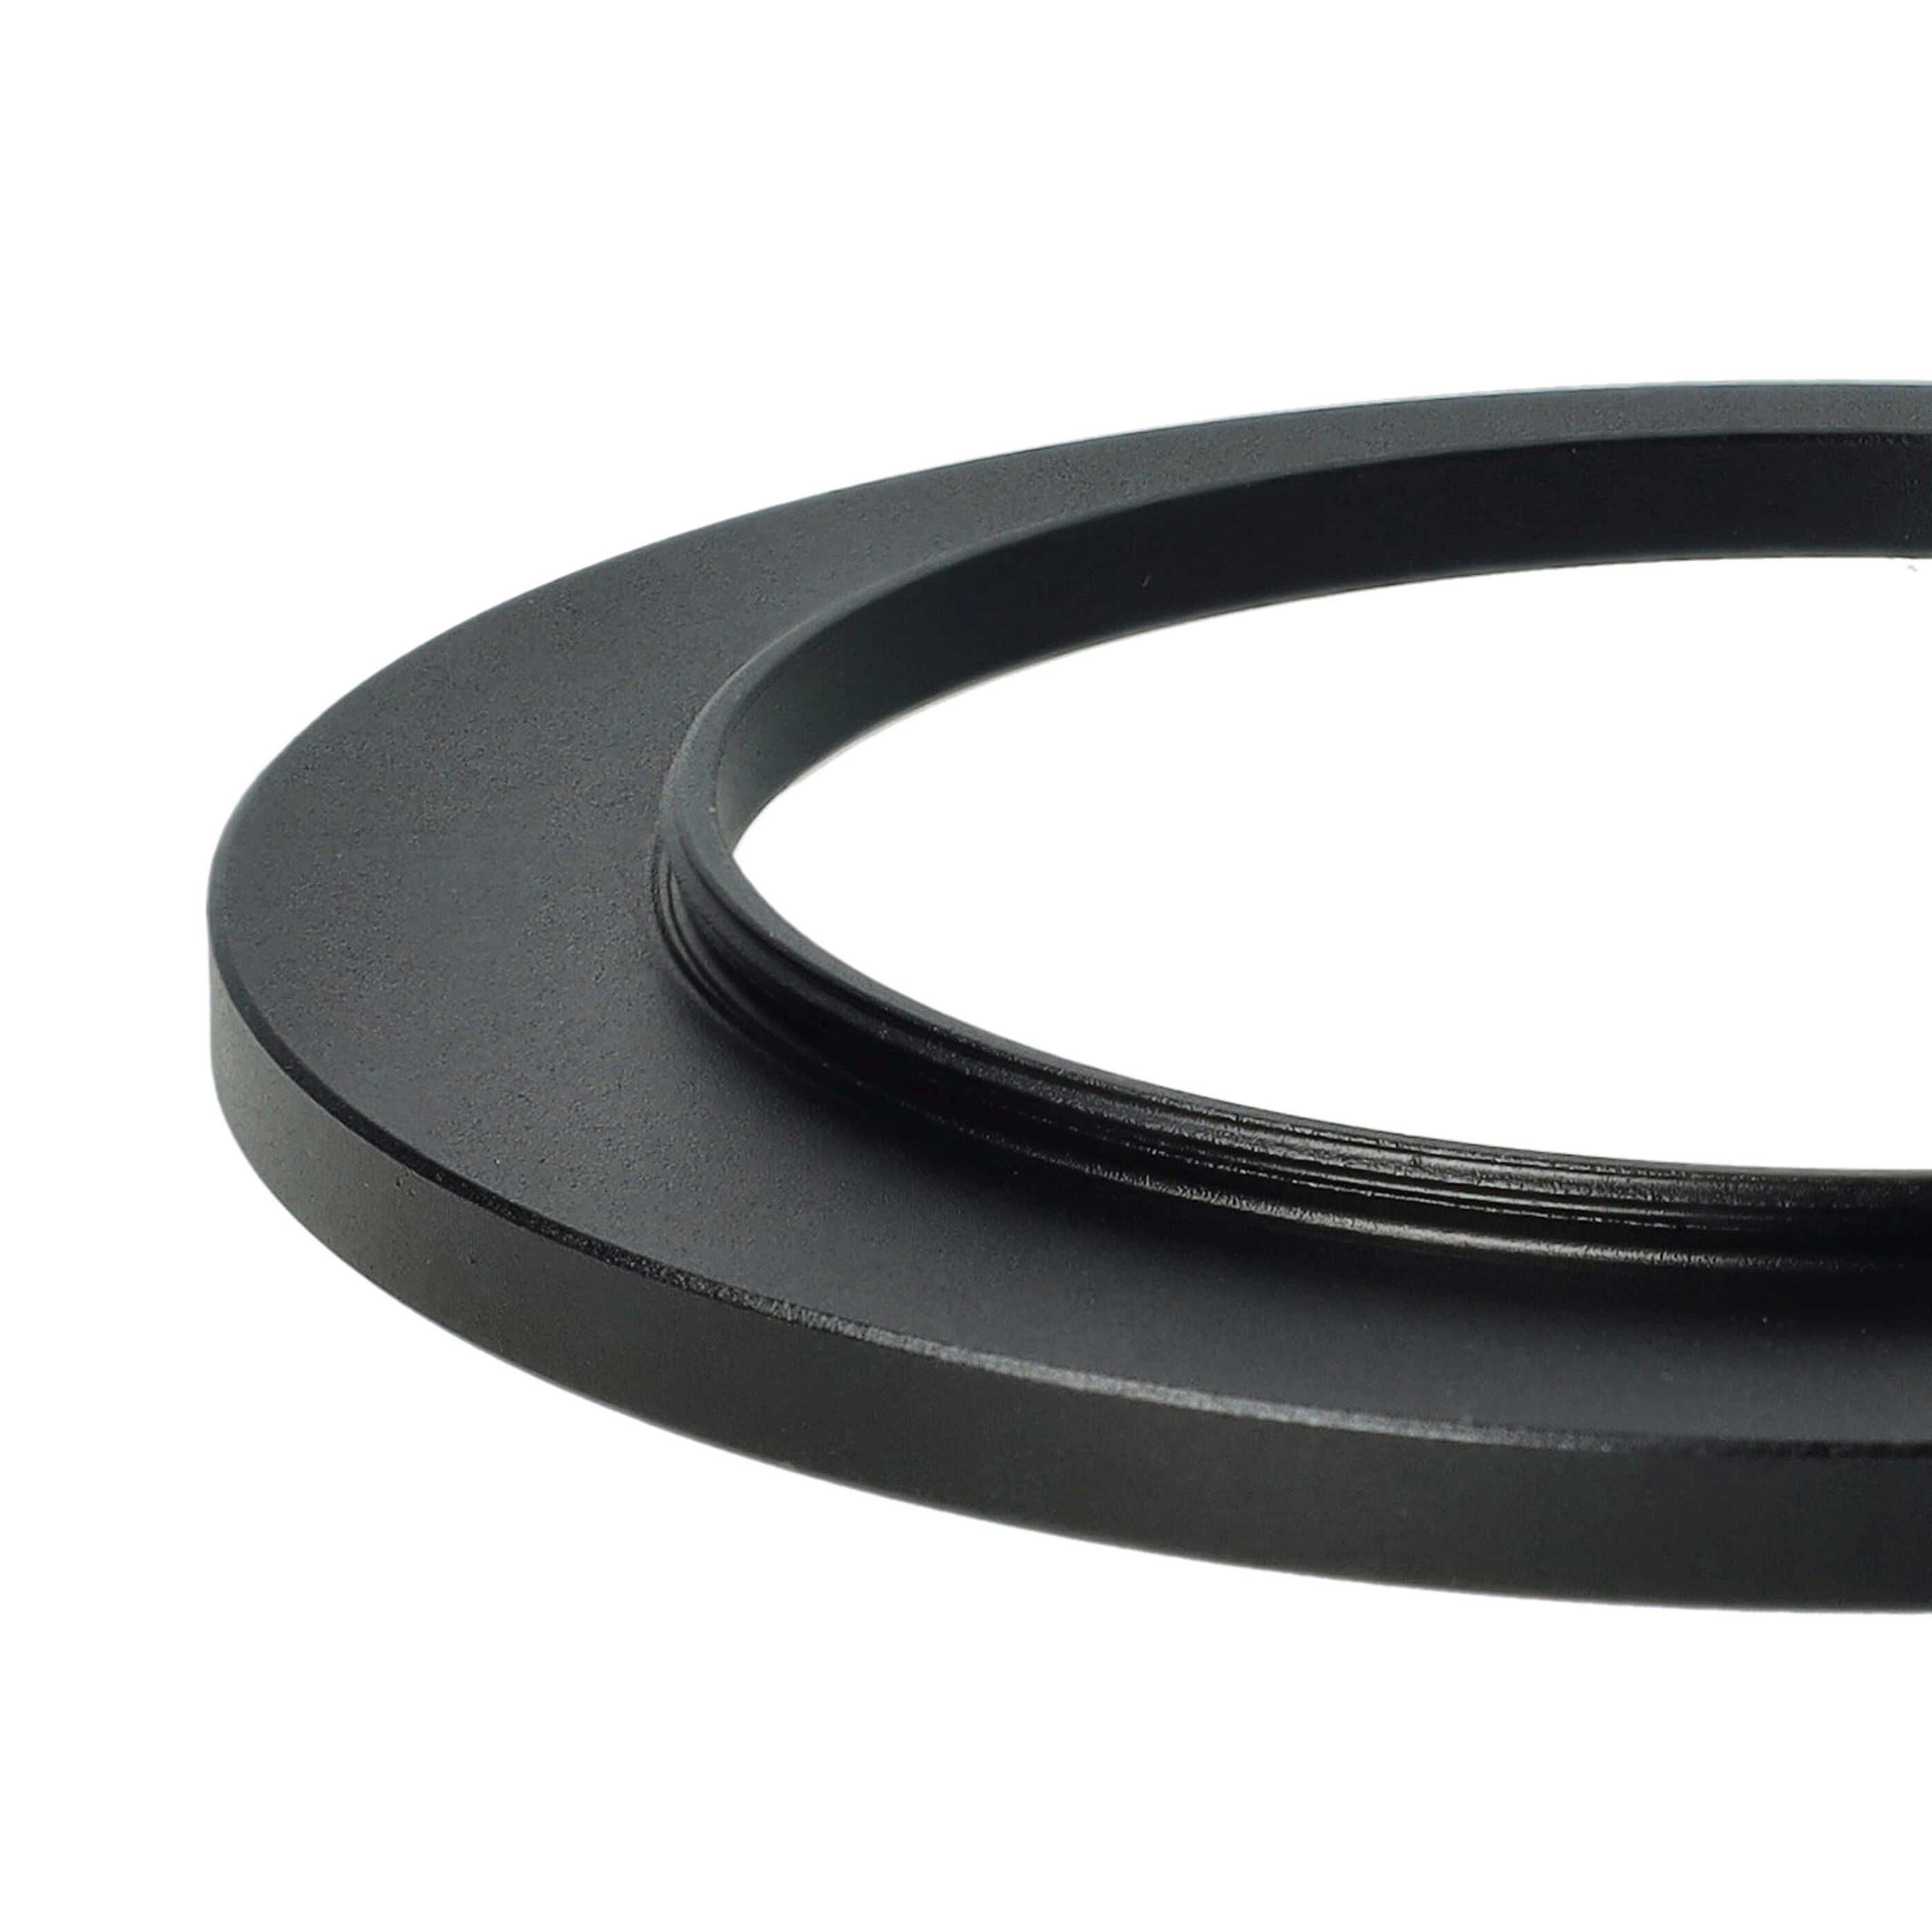 Step-Up Ring Adapter of 58 mm to 77 mmfor various Camera Lens - Filter Adapter